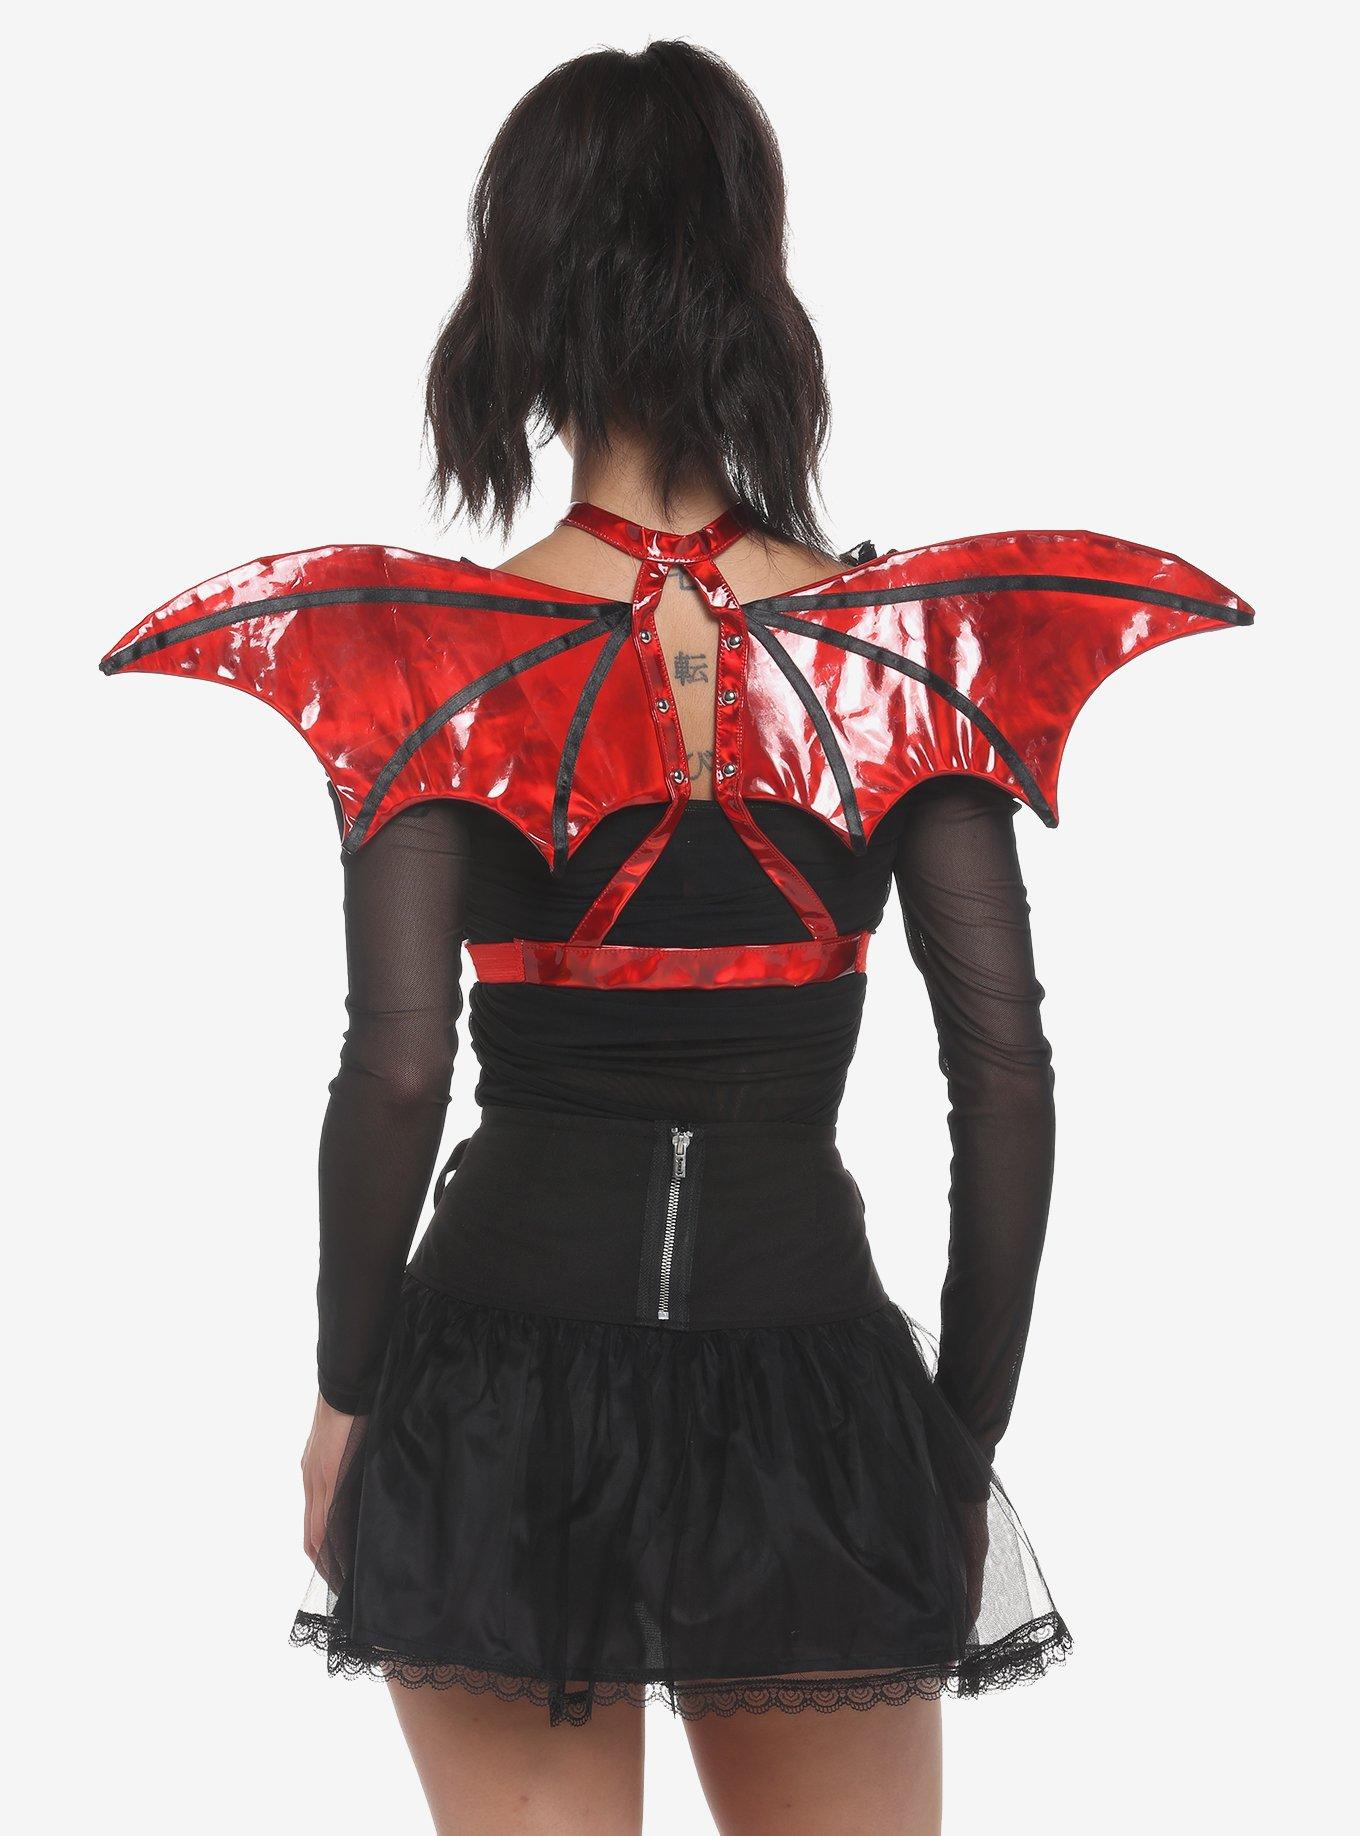 Red Devil Wings Harness Hot Topic